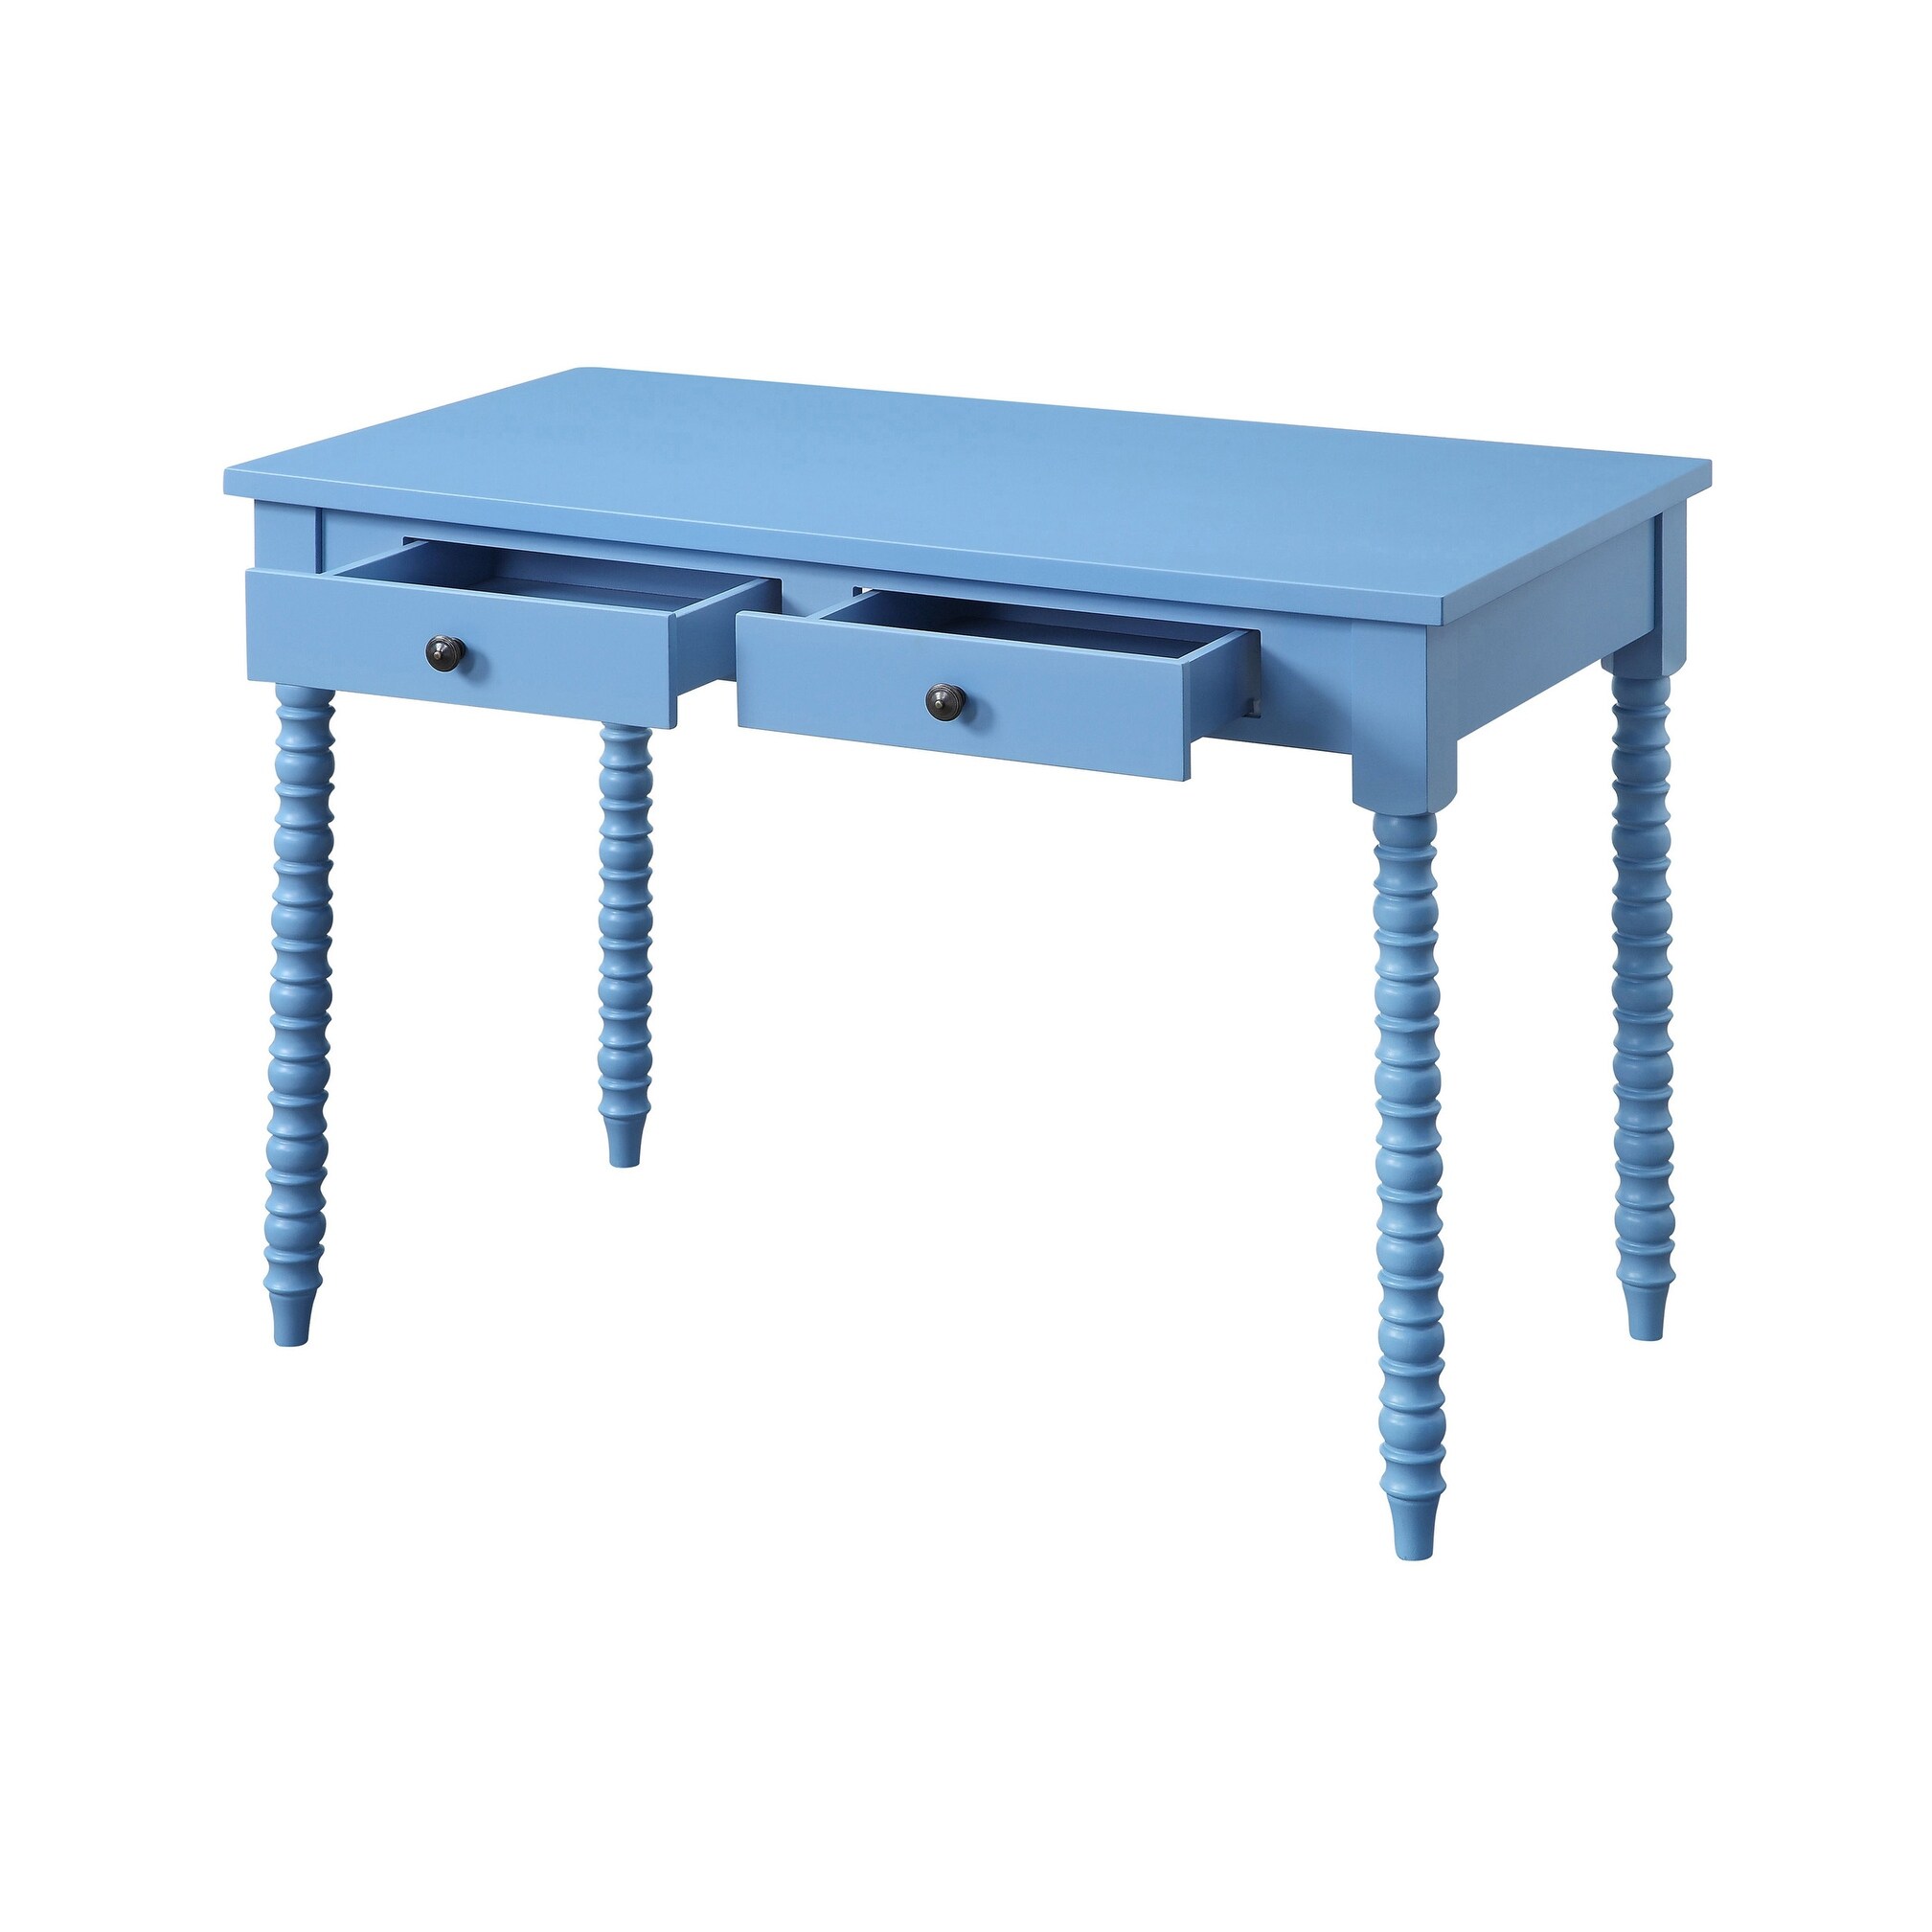 ACME Altmar Writing Desk in Blue - image 4 of 5